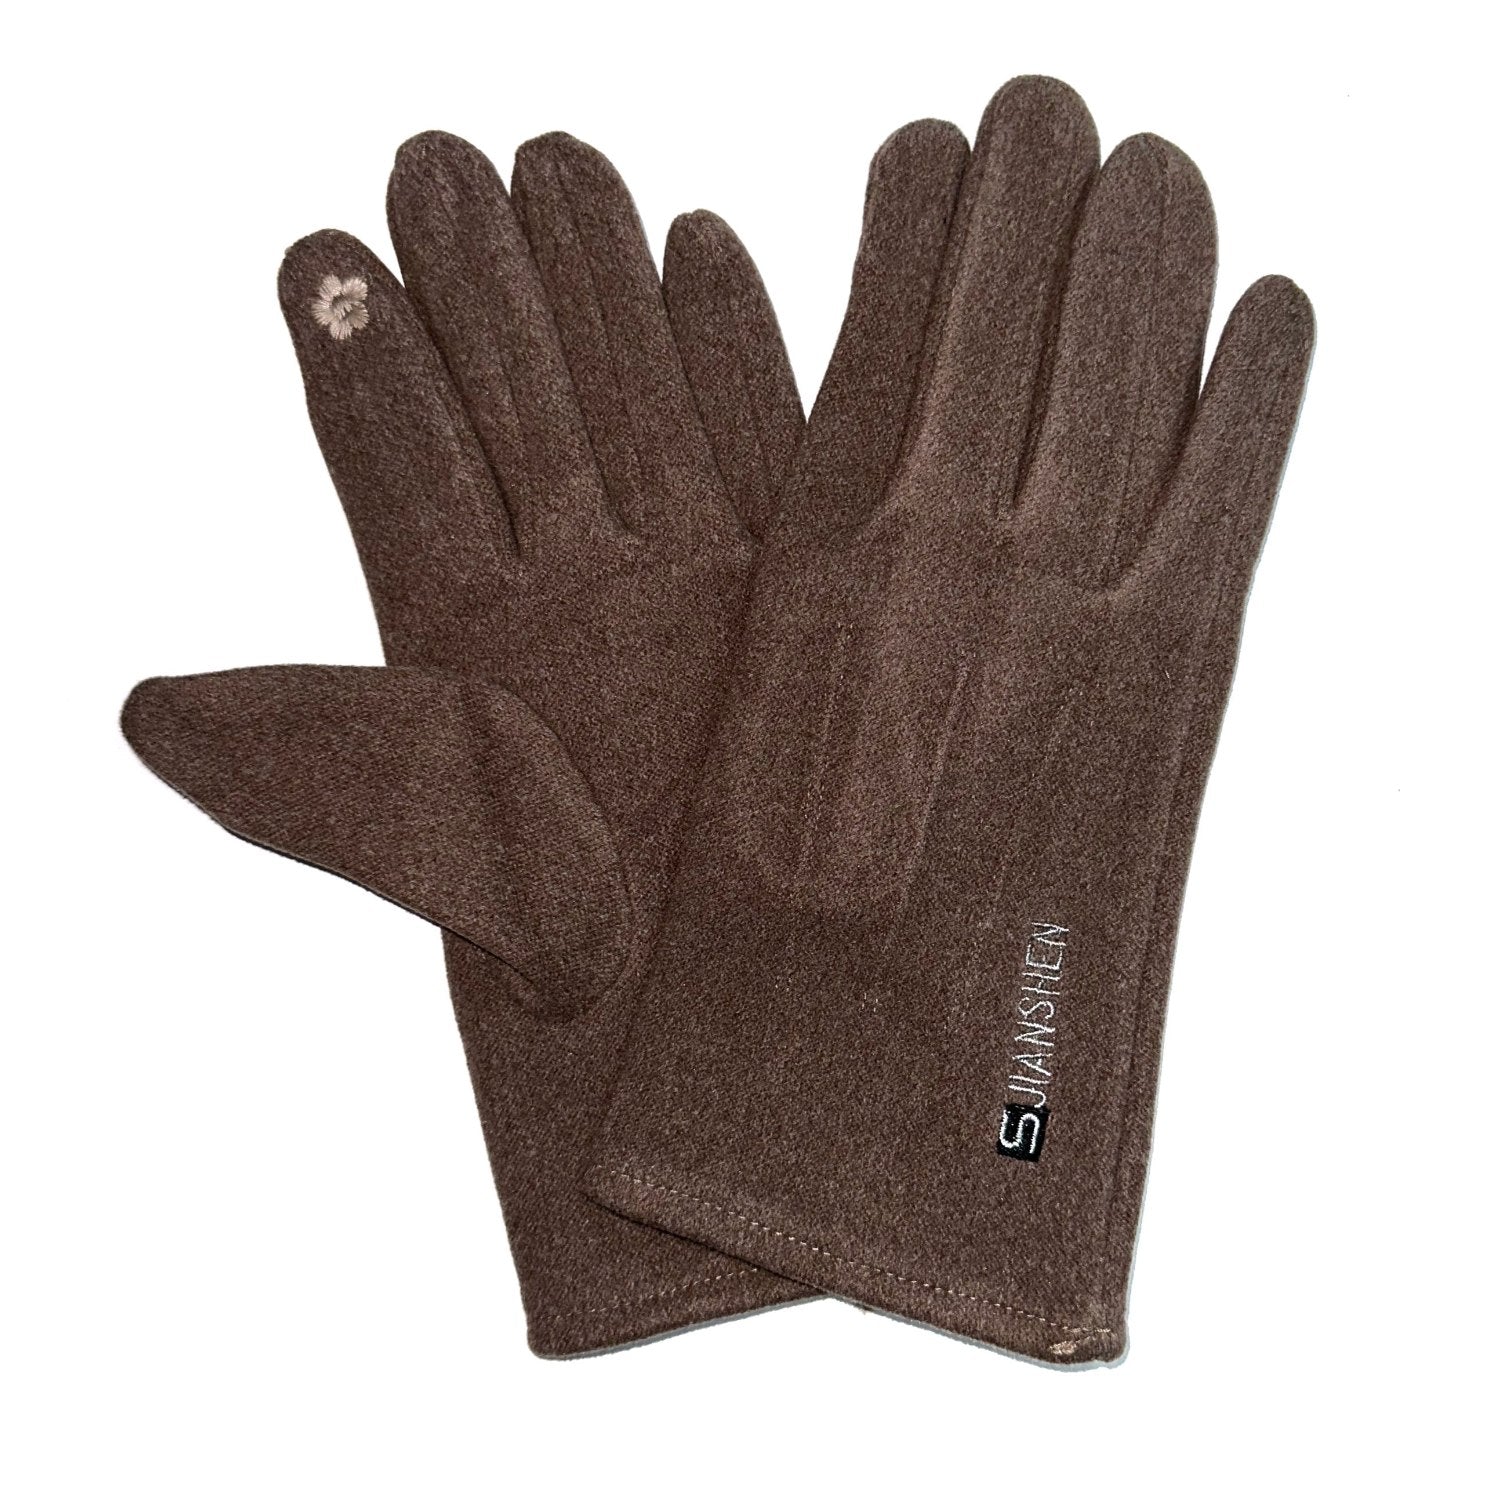 Buy K2 Insulation Layering Gloves Brown at Gokyo Outdoor Clothing & Gear